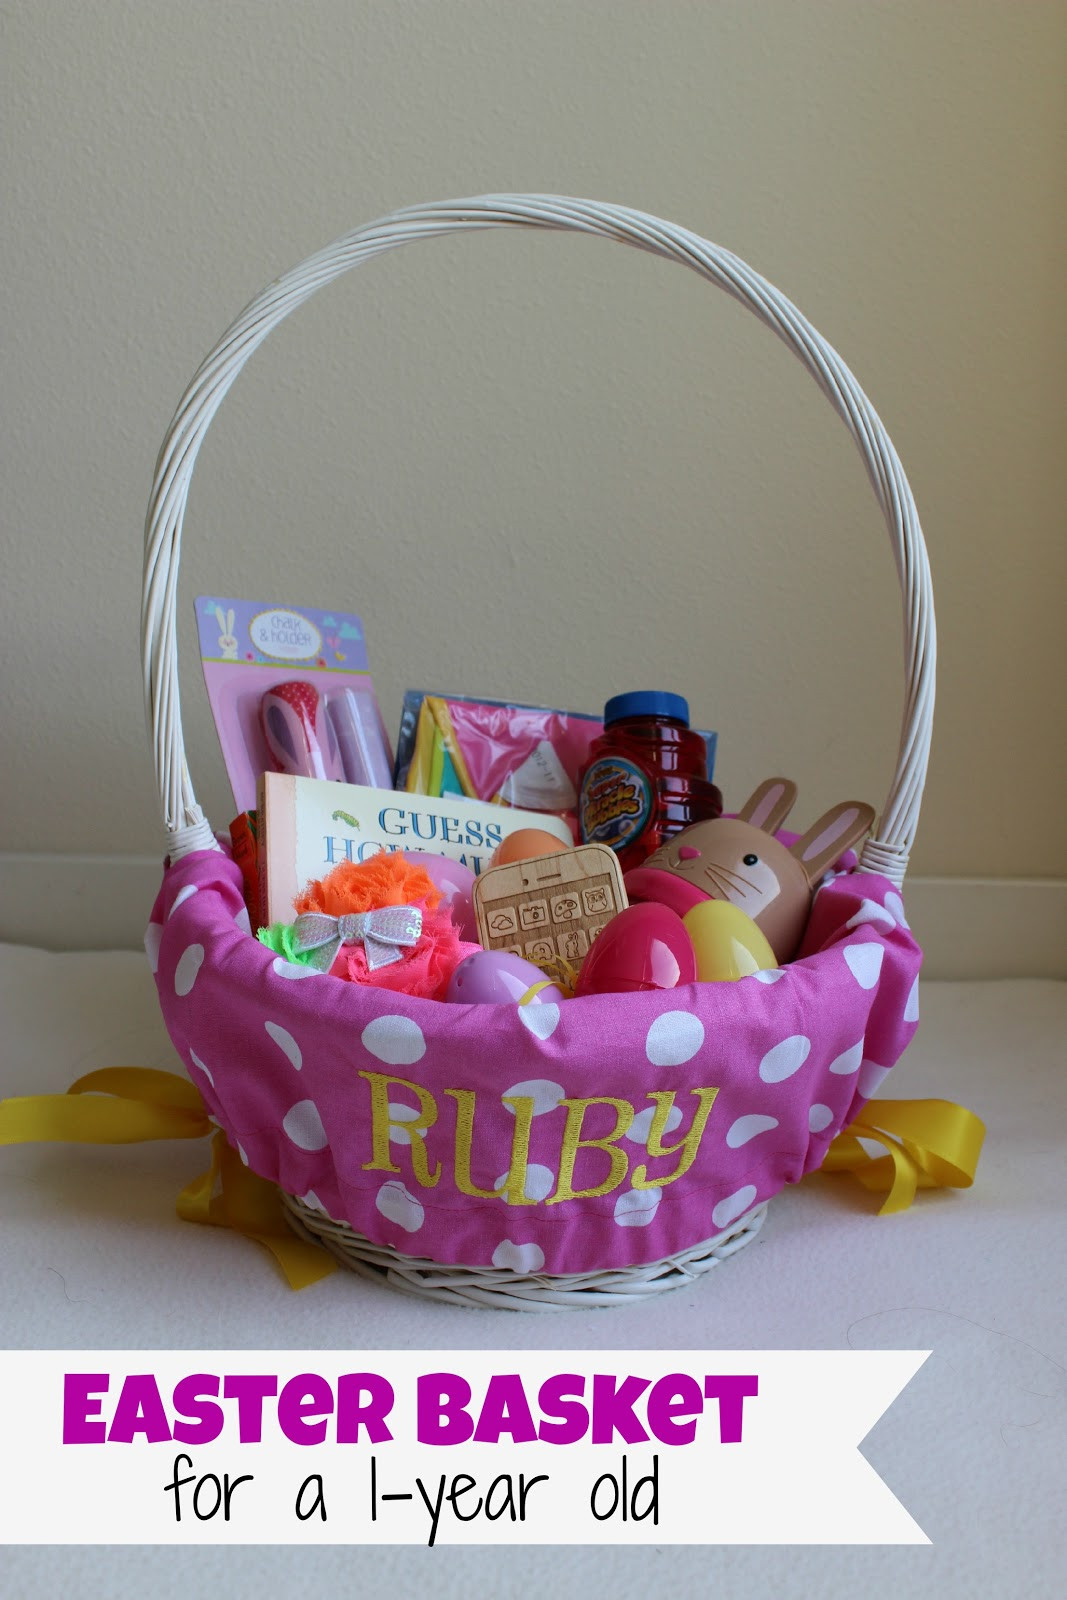 Easter Basket Ideas For 4 Year Old Boy
 We G Three Ruby s First Easter Basket